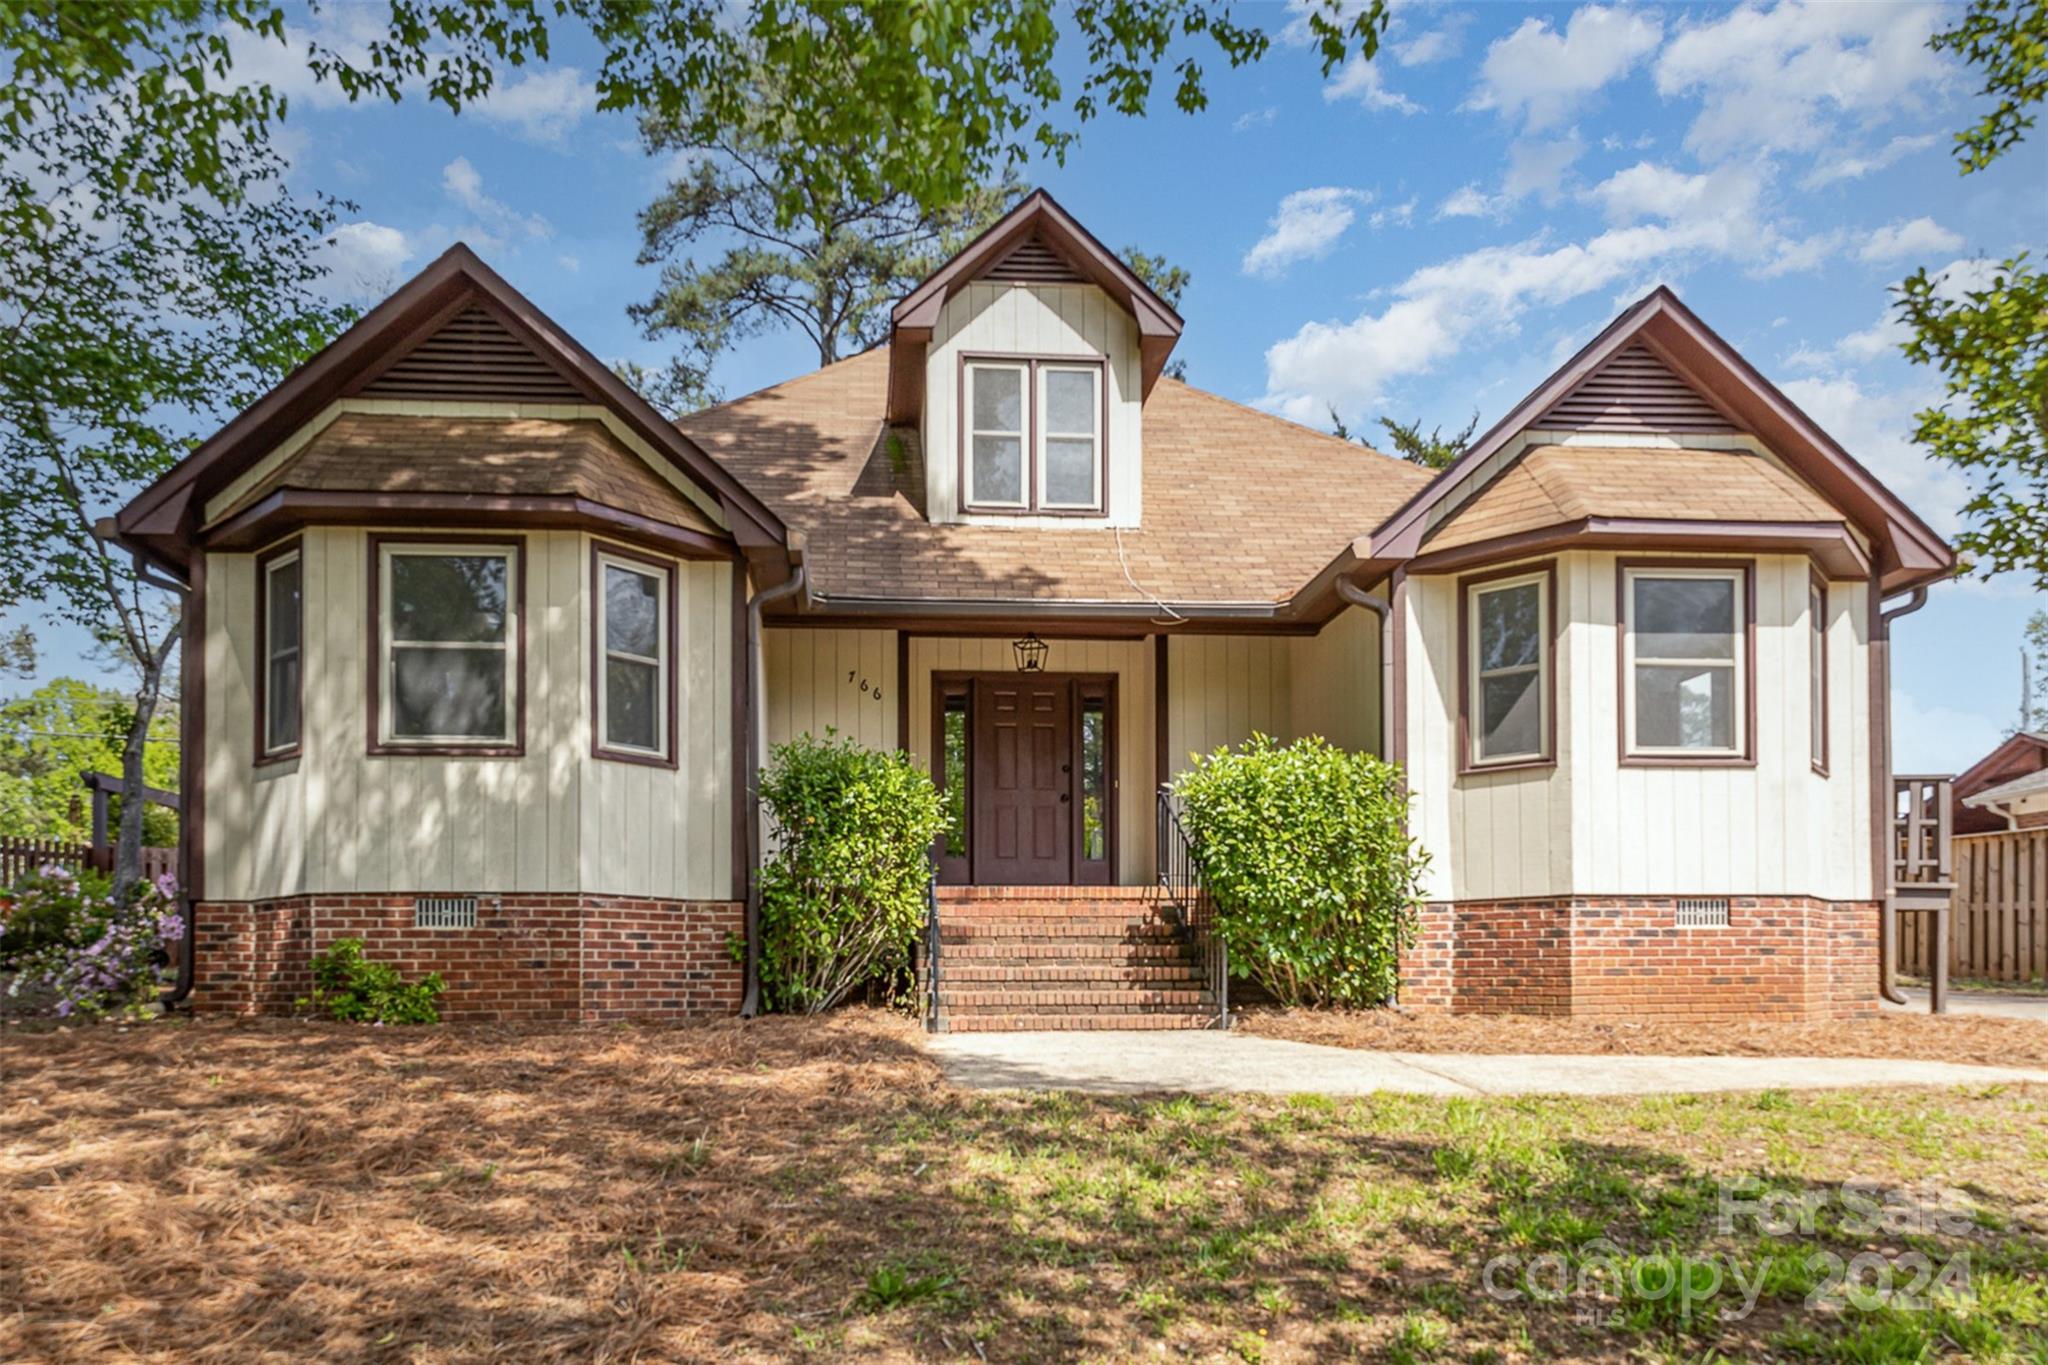 Photo one of 766 Wofford St Rock Hill SC 29730 | MLS 4127048